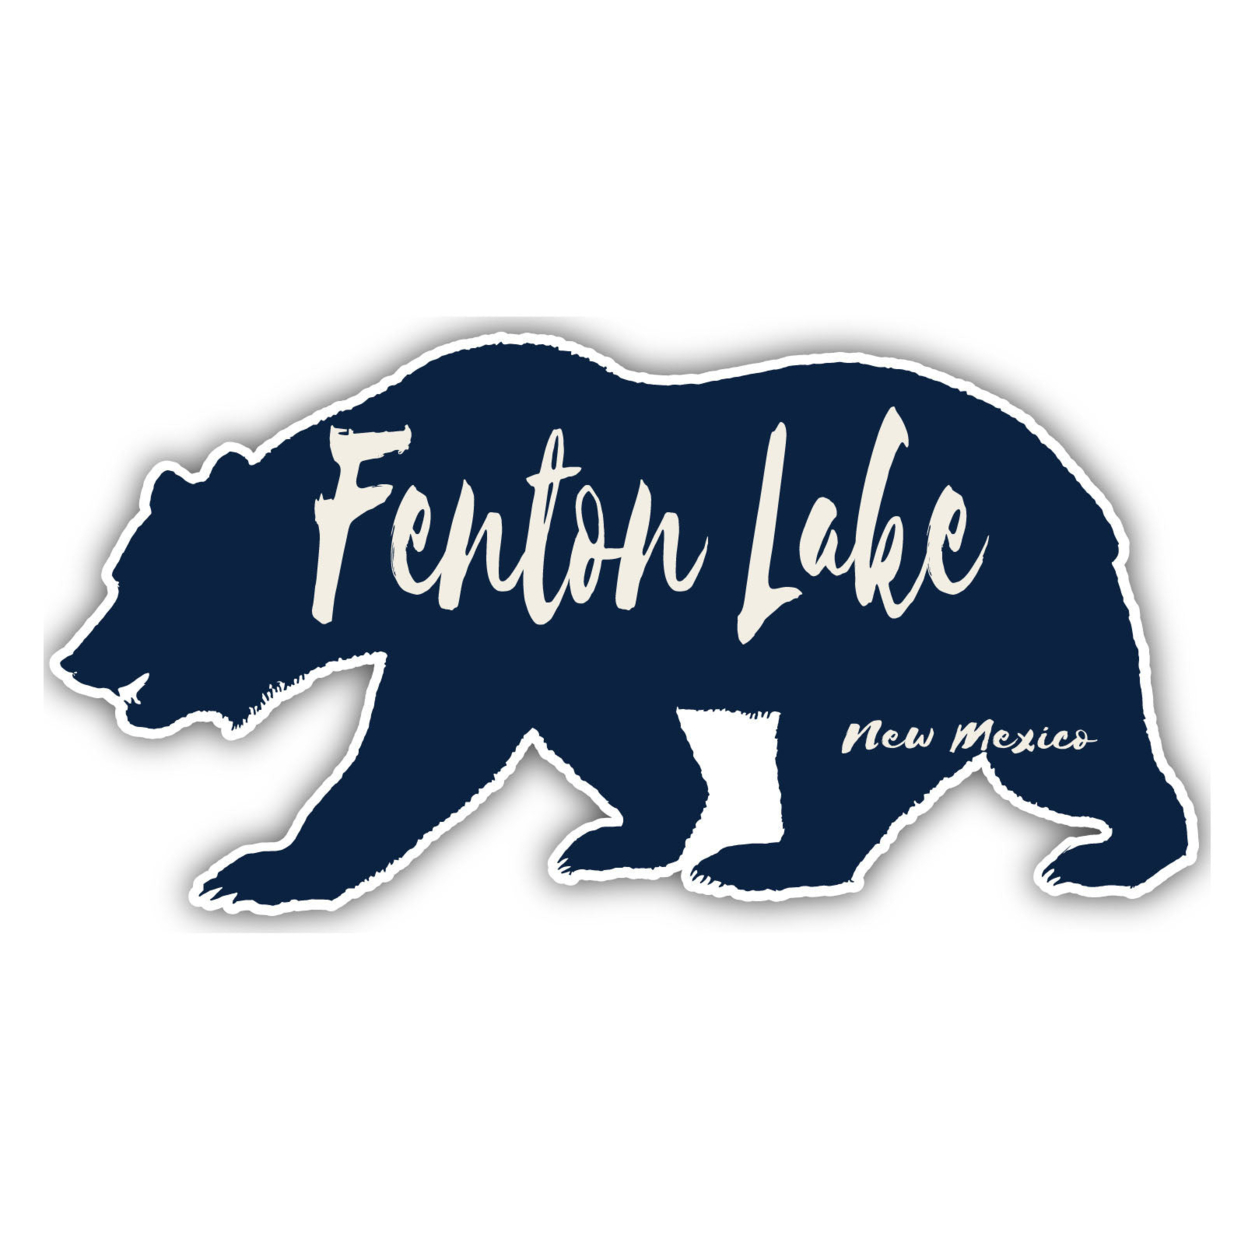 Fenton Lake New Mexico Souvenir Decorative Stickers (Choose Theme And Size) - 4-Pack, 4-Inch, Bear